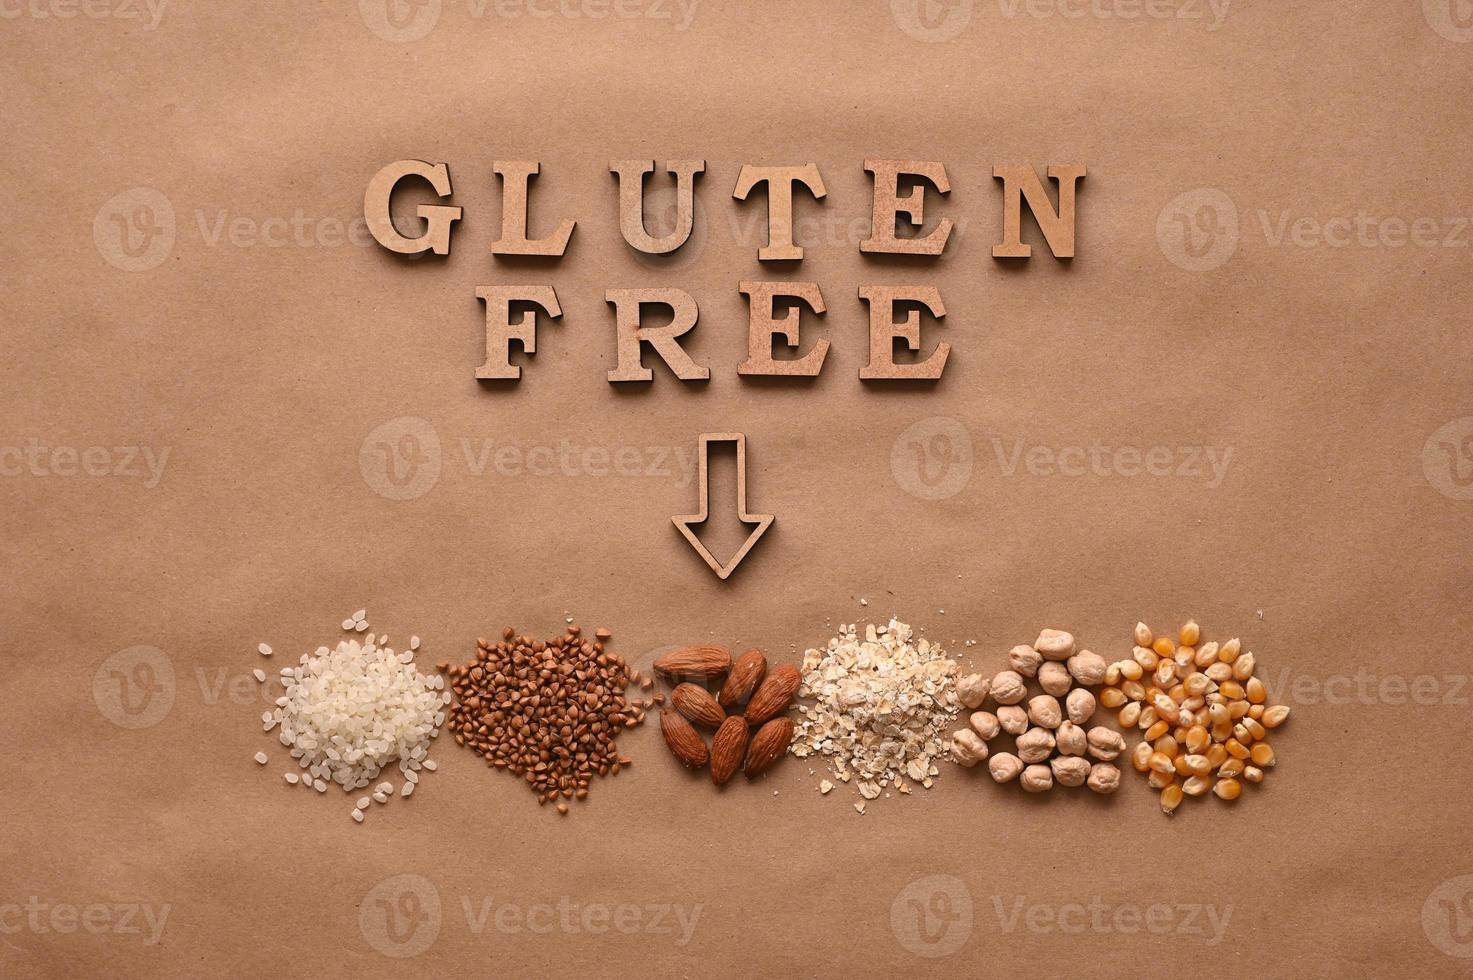 Gluten free text and gluten free products on brown background photo